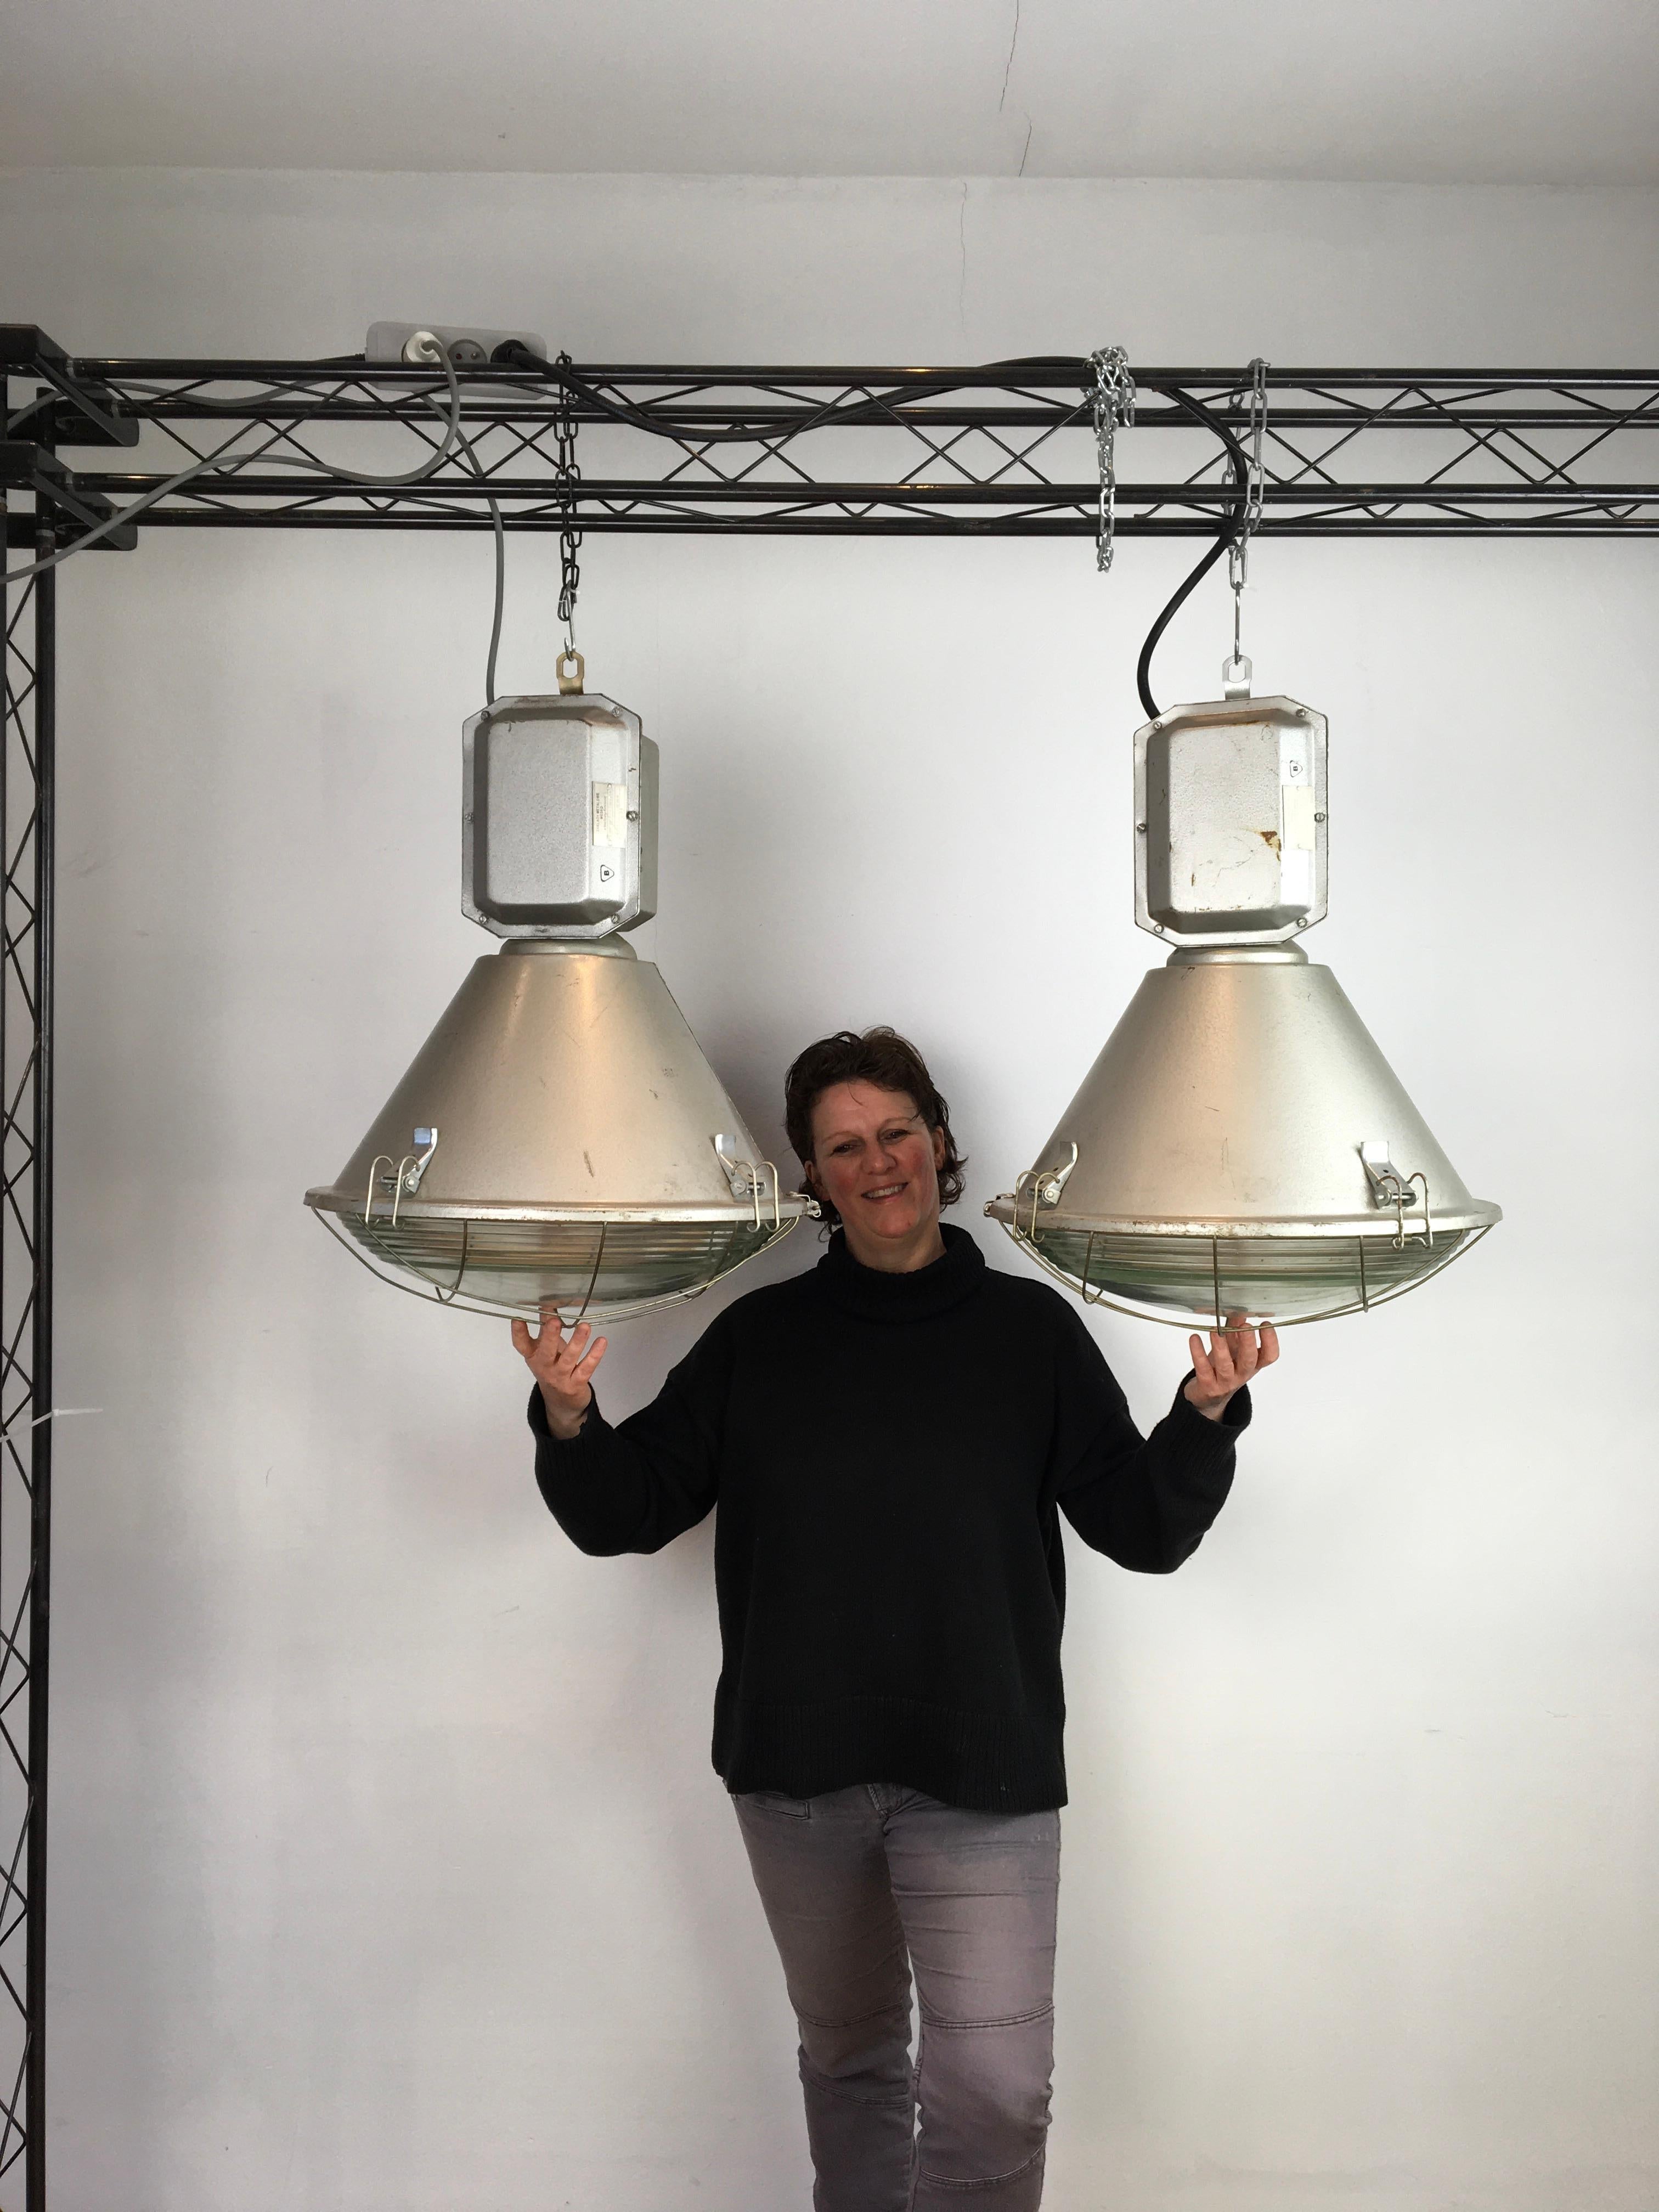 Vintage industrial factory lights. 
Large industrial lamps with a convex glass and a metal grill. 
They date from 1994 and were made by the Zaklady Metalowe Mesko w Skarzysku - Kamiennej - Poland. 

These large grey factory lighting will look great